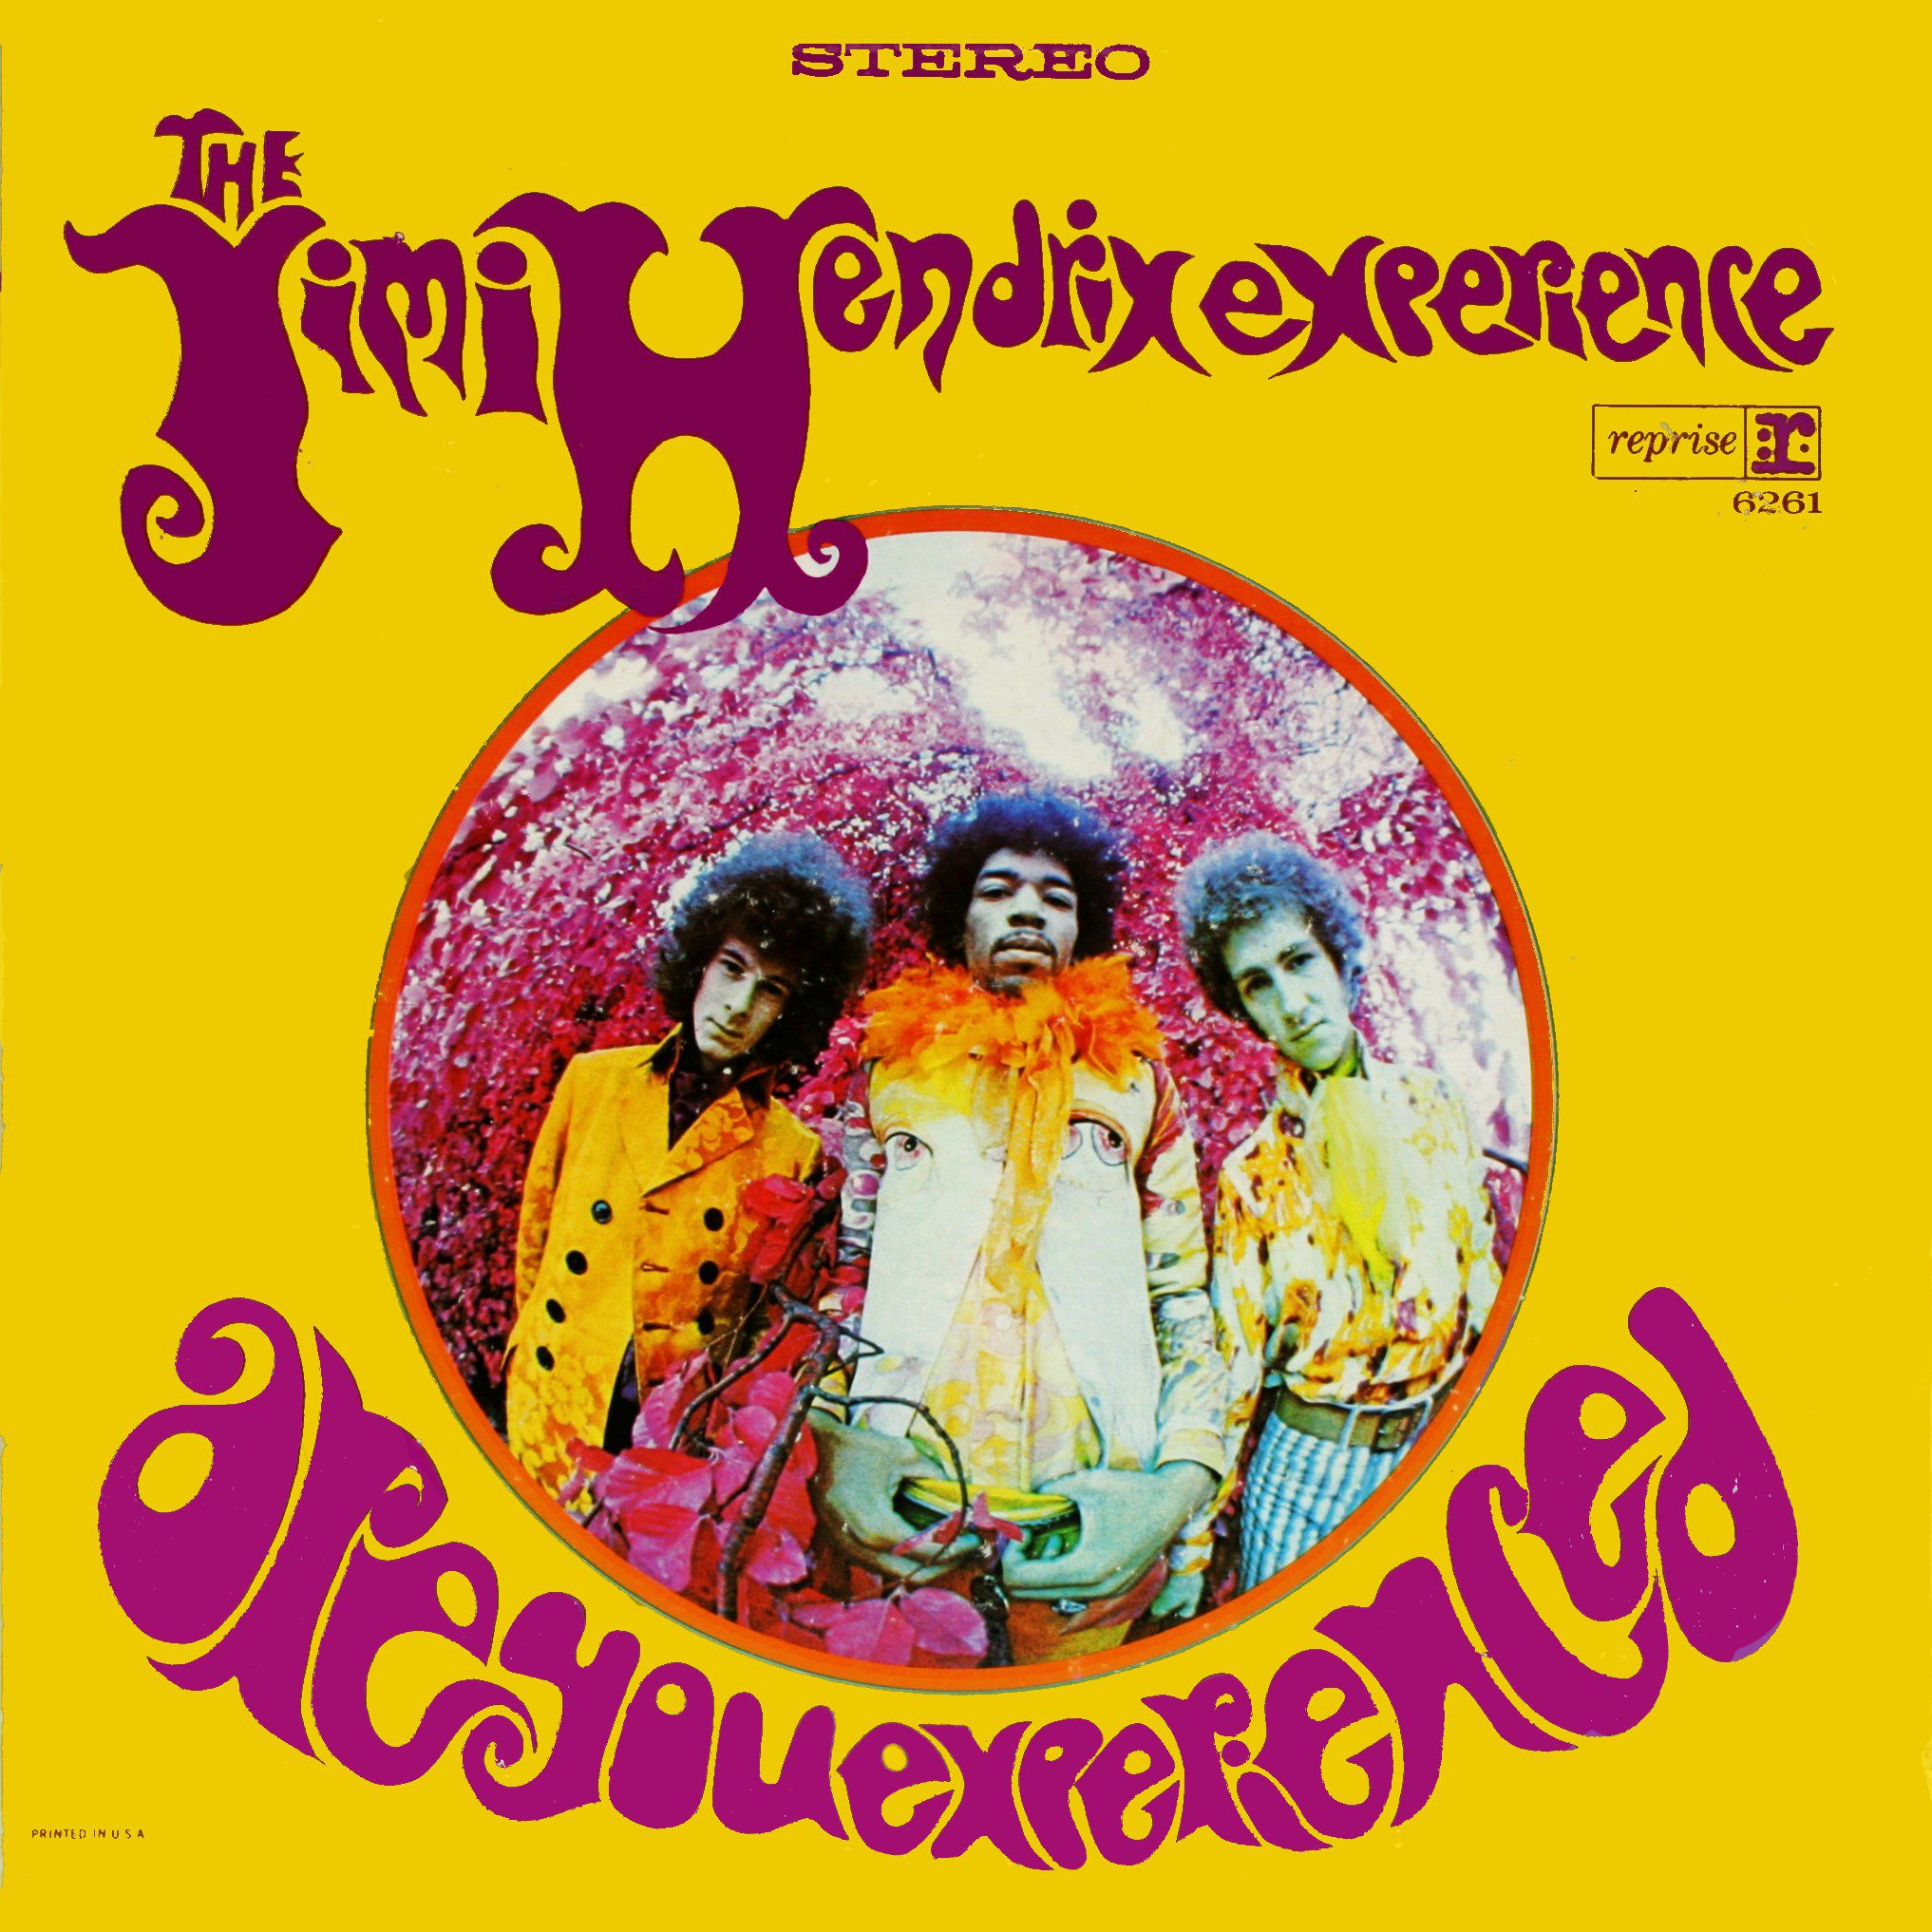 The Electrifying Debut of The Jimi Hendrix Experience